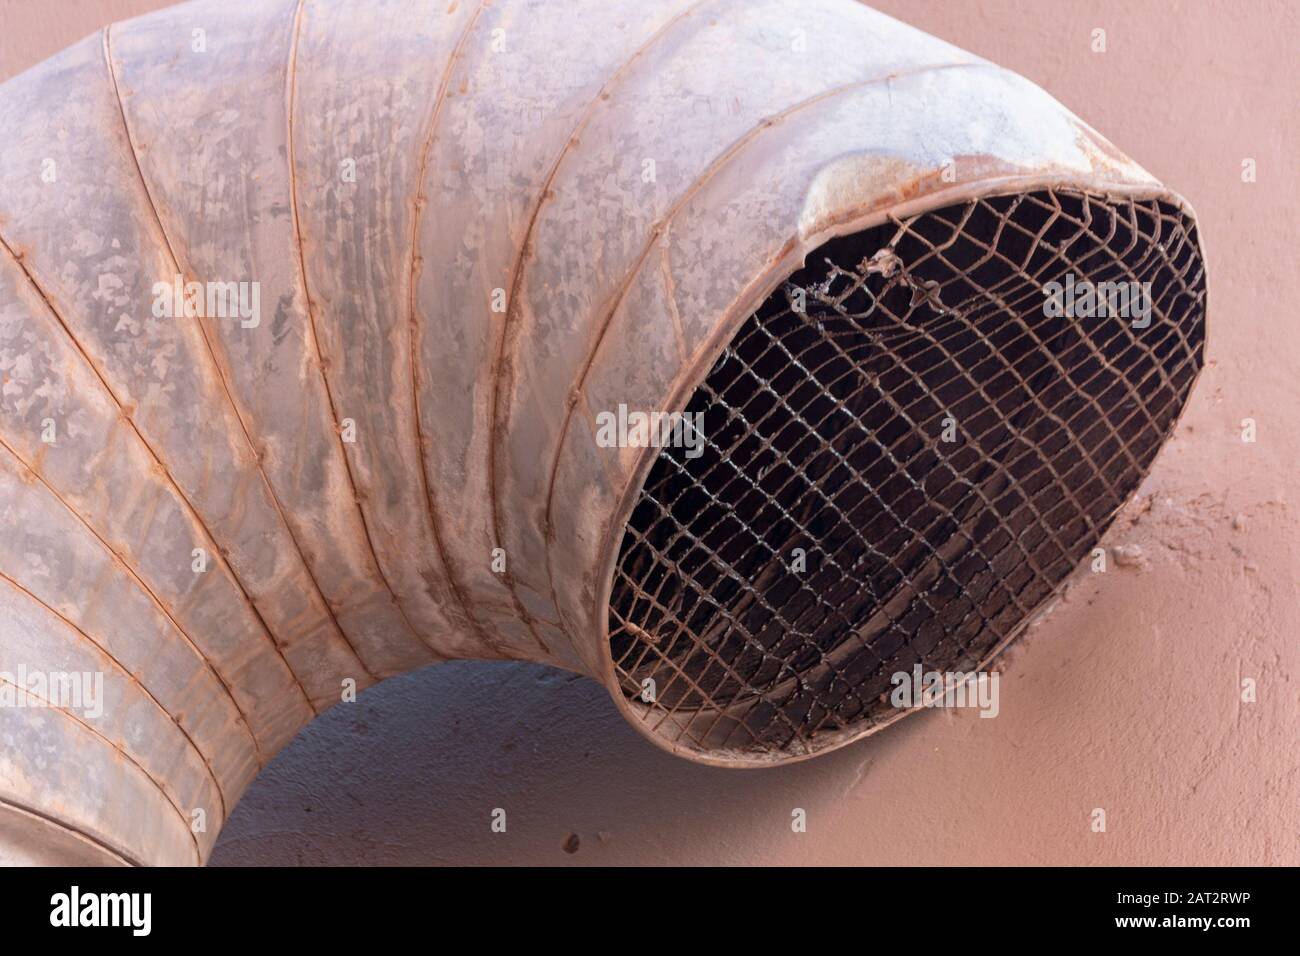 A close uo view of a large metal air vent attached to the side of a building Stock Photo